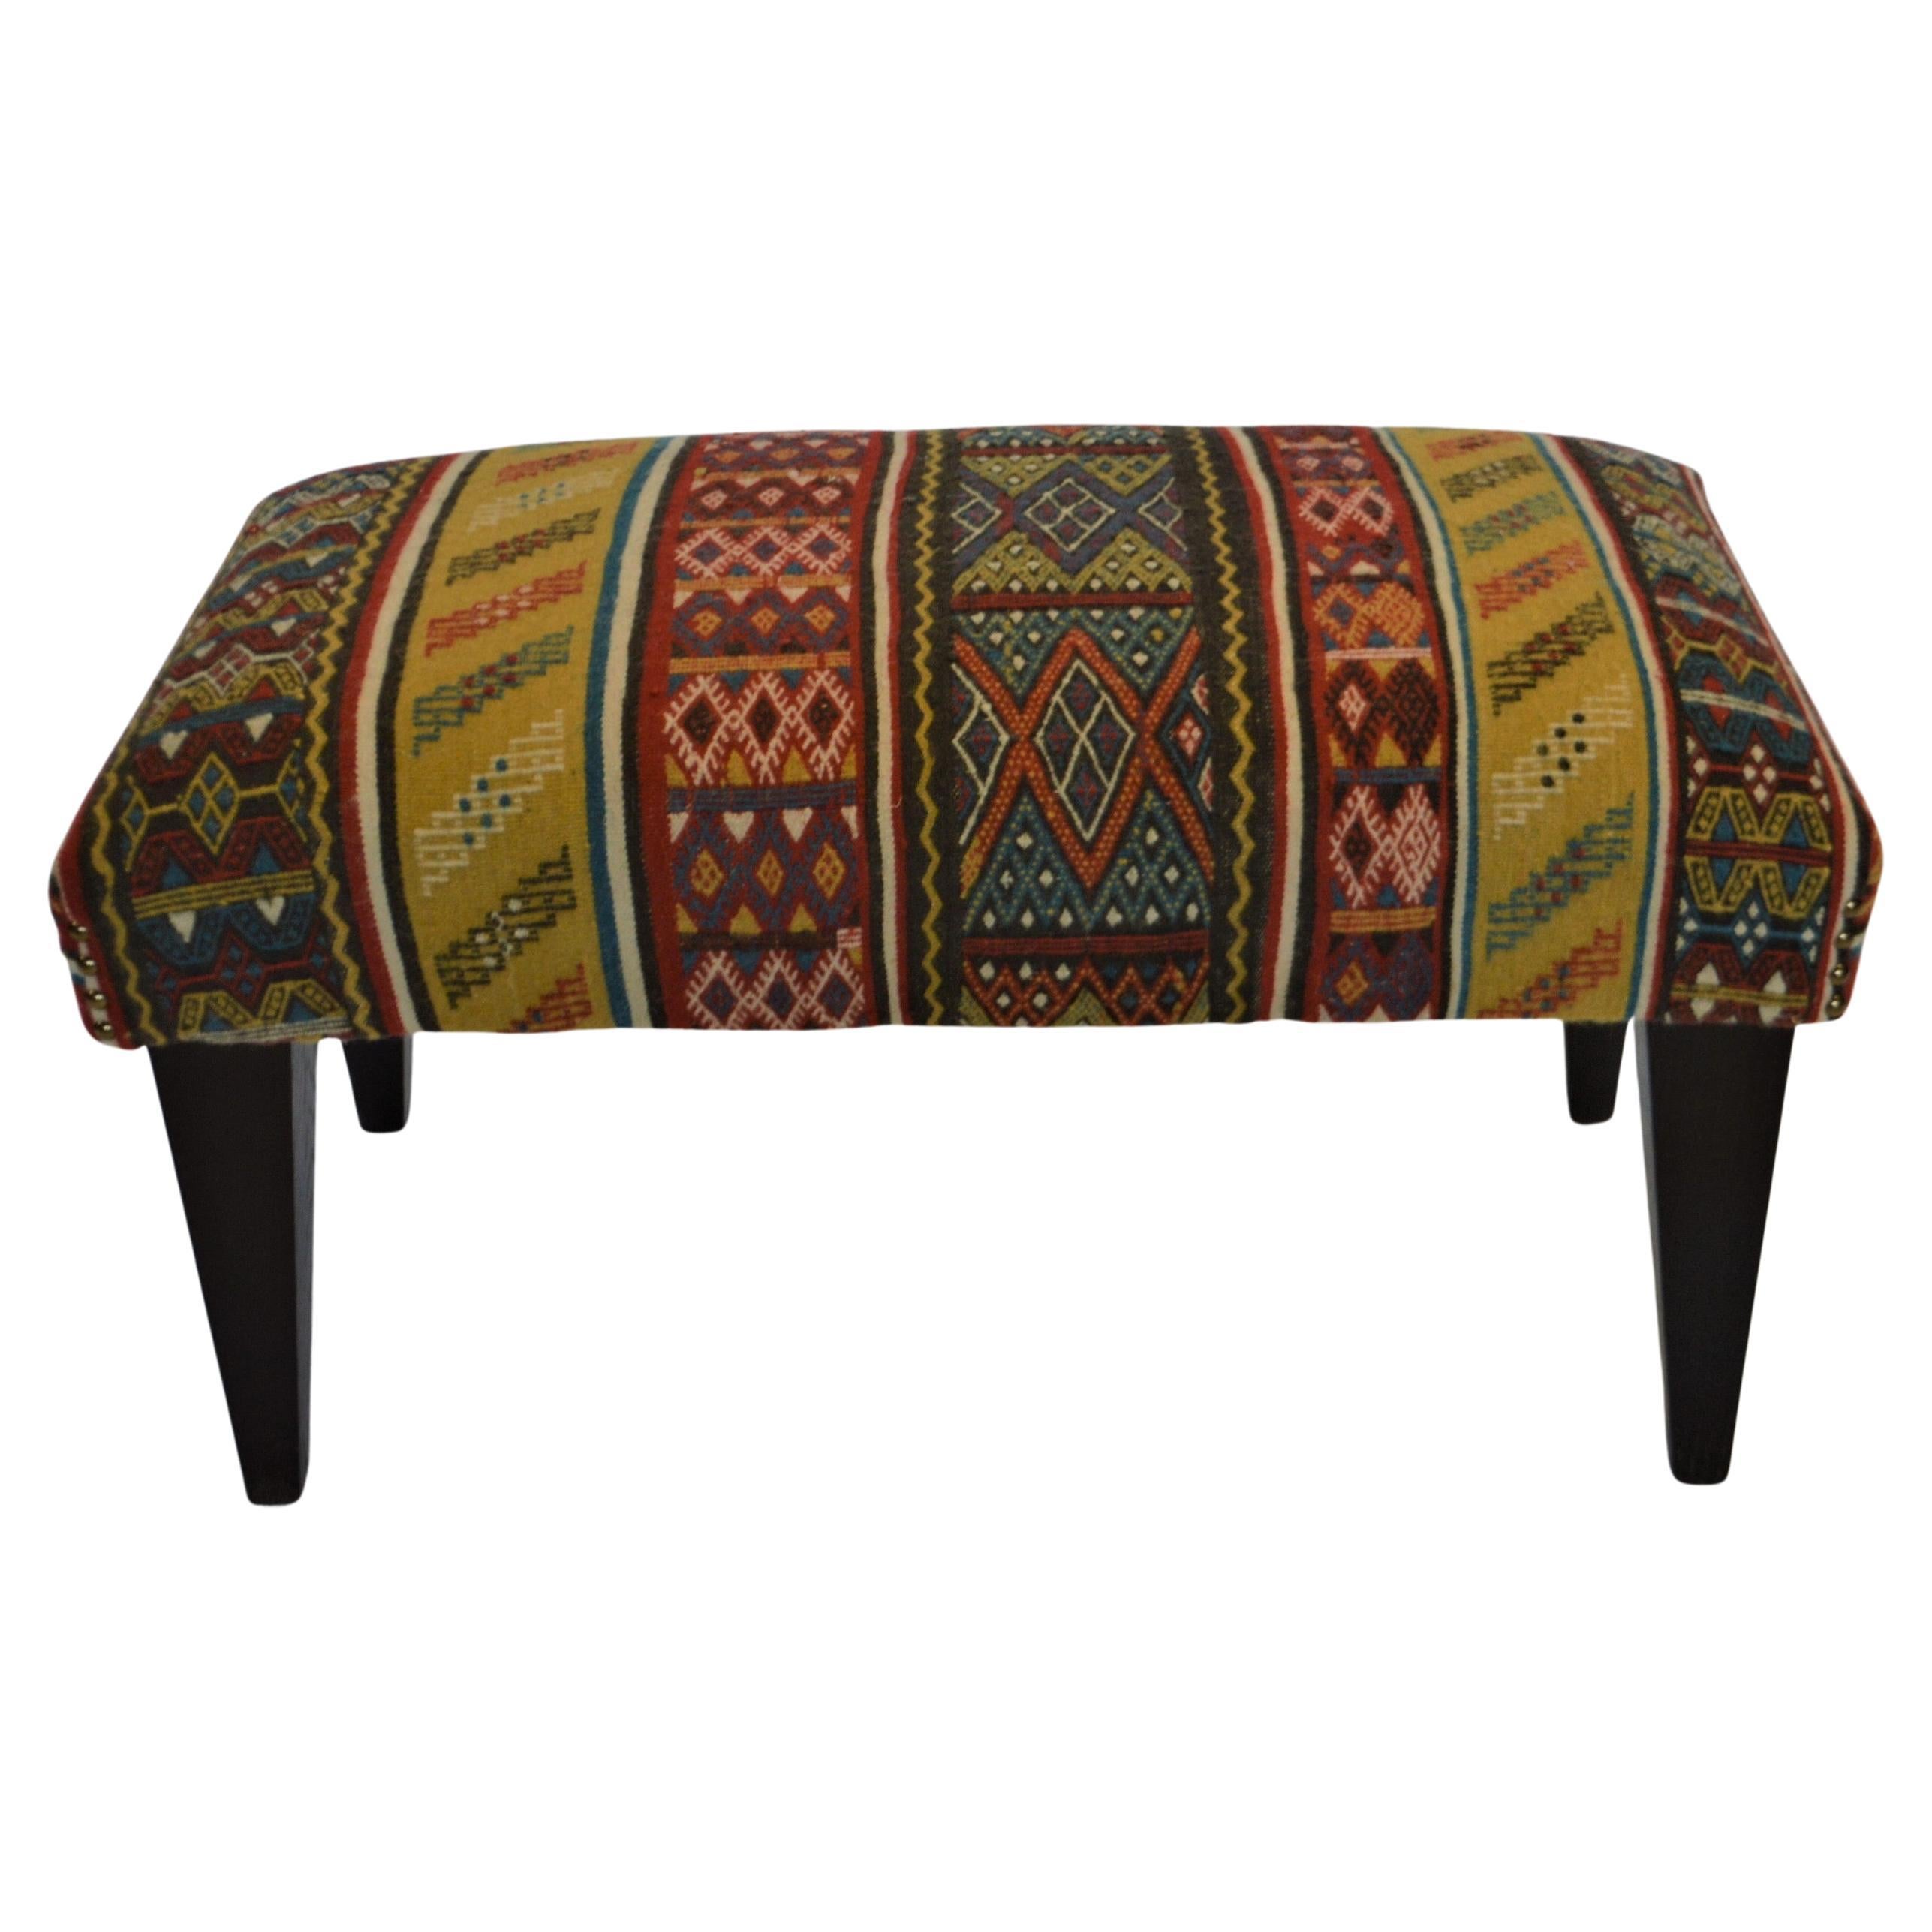 Custom Bench Upholstered with a Vintage Peruvian Rug